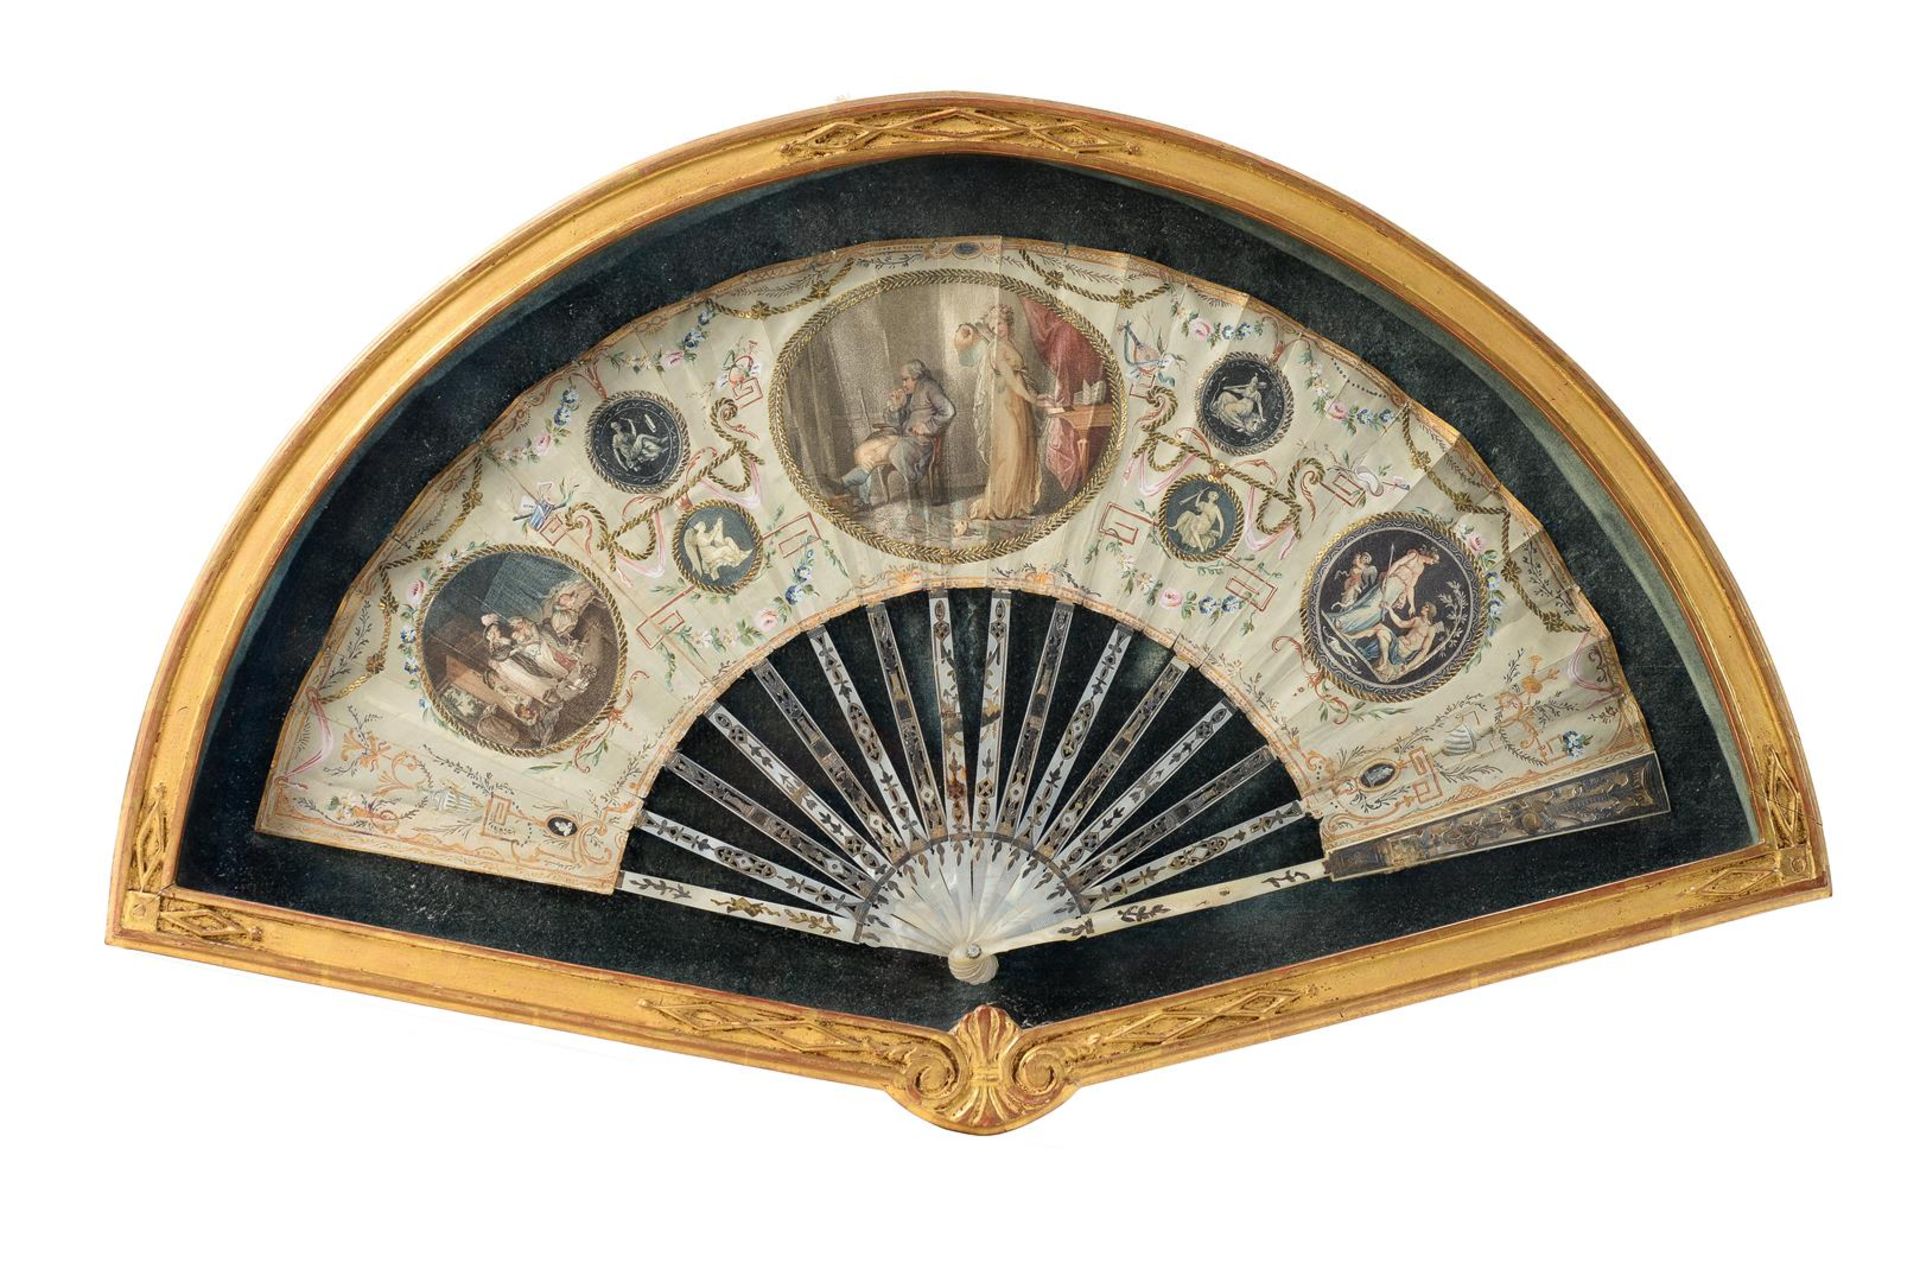 A silk with mother of pearl fan, in wooden case. France, Louis XVI, around 1790.